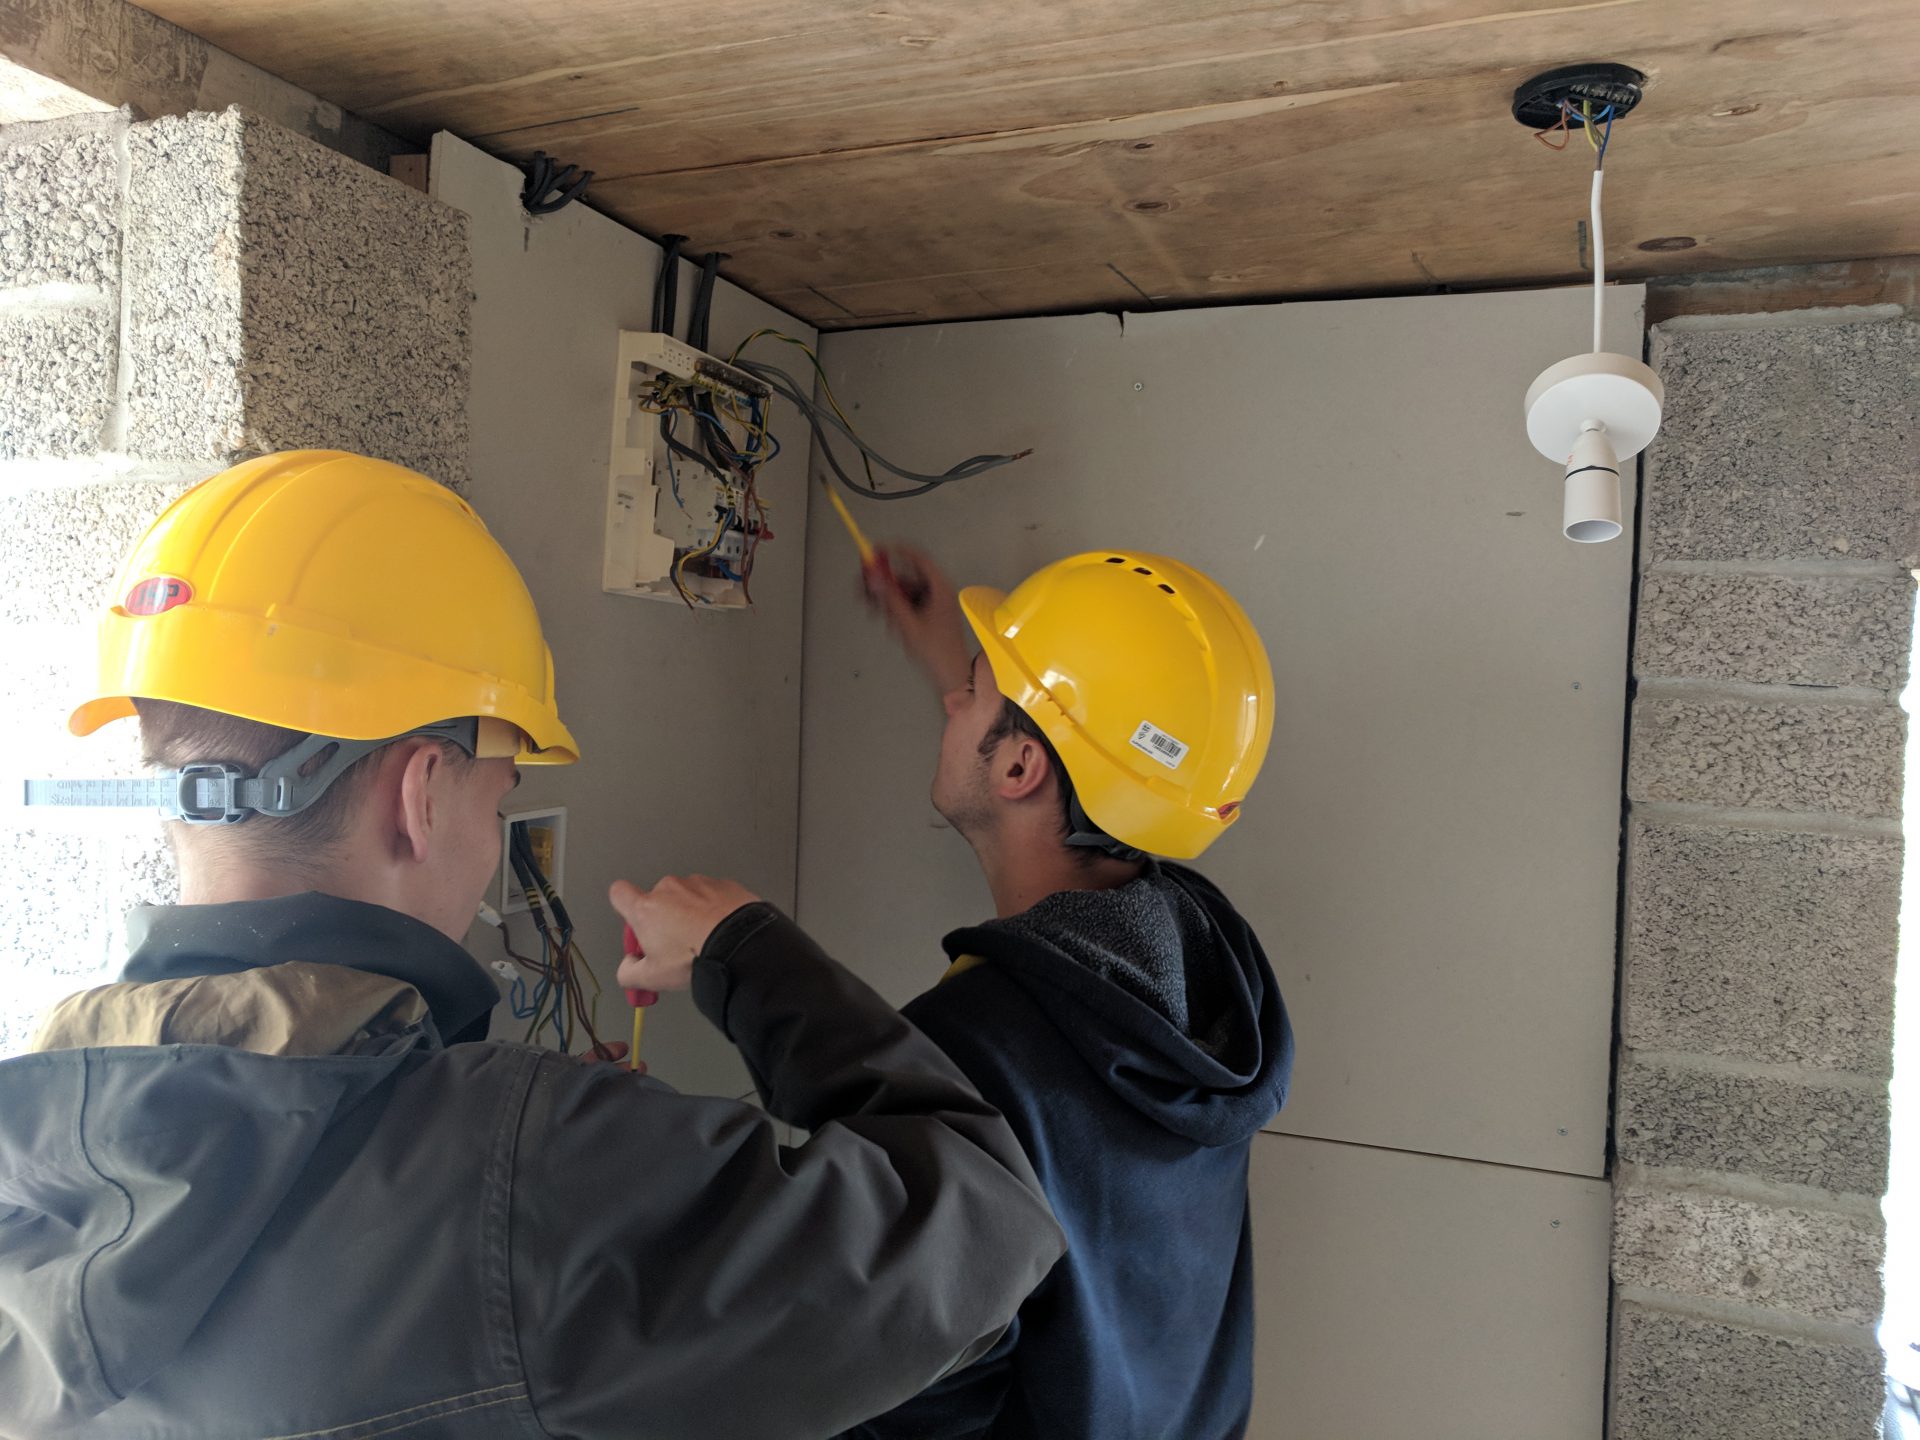 Electrical students in hard-hats work on a fuse box